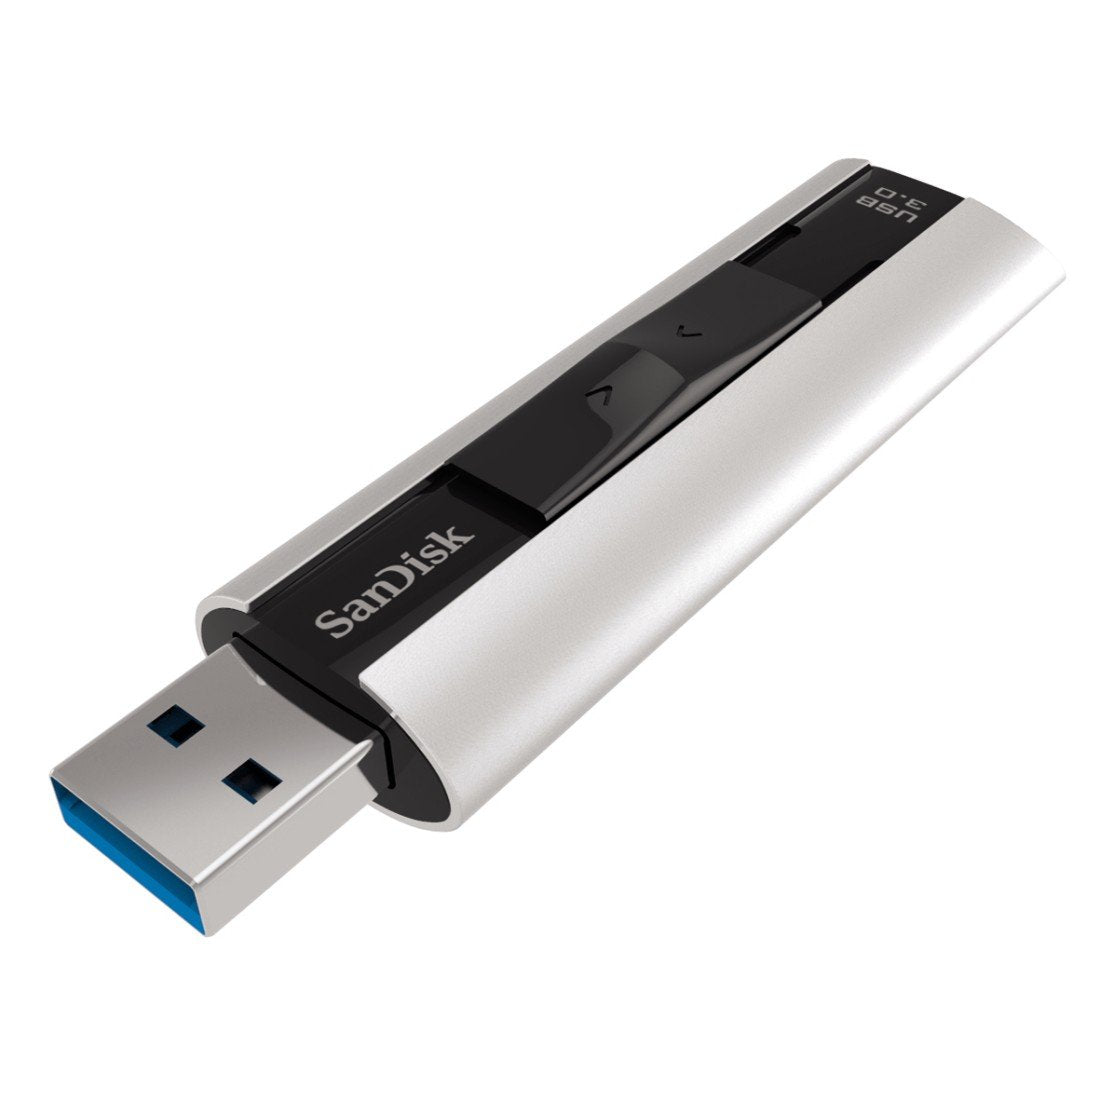 SanDisk Extreme PRO CZ88 128GB USB 3.0 Flash Drive Speeds Up To 260MB/s- SDCZ88-128G-G46